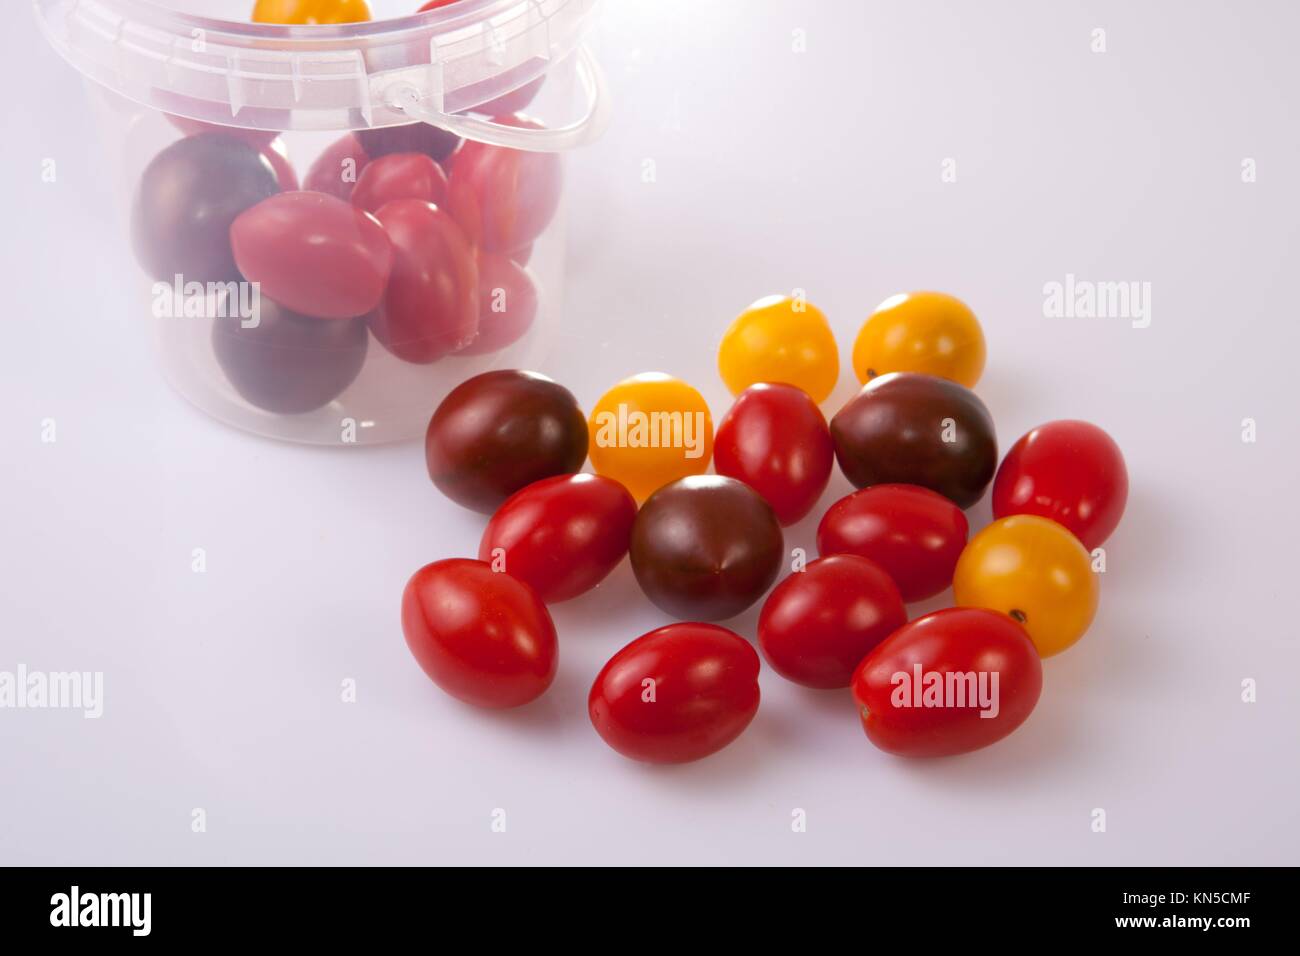 Bucket and colorful cherry tomatoes. Isolated over white background. Stock Photo